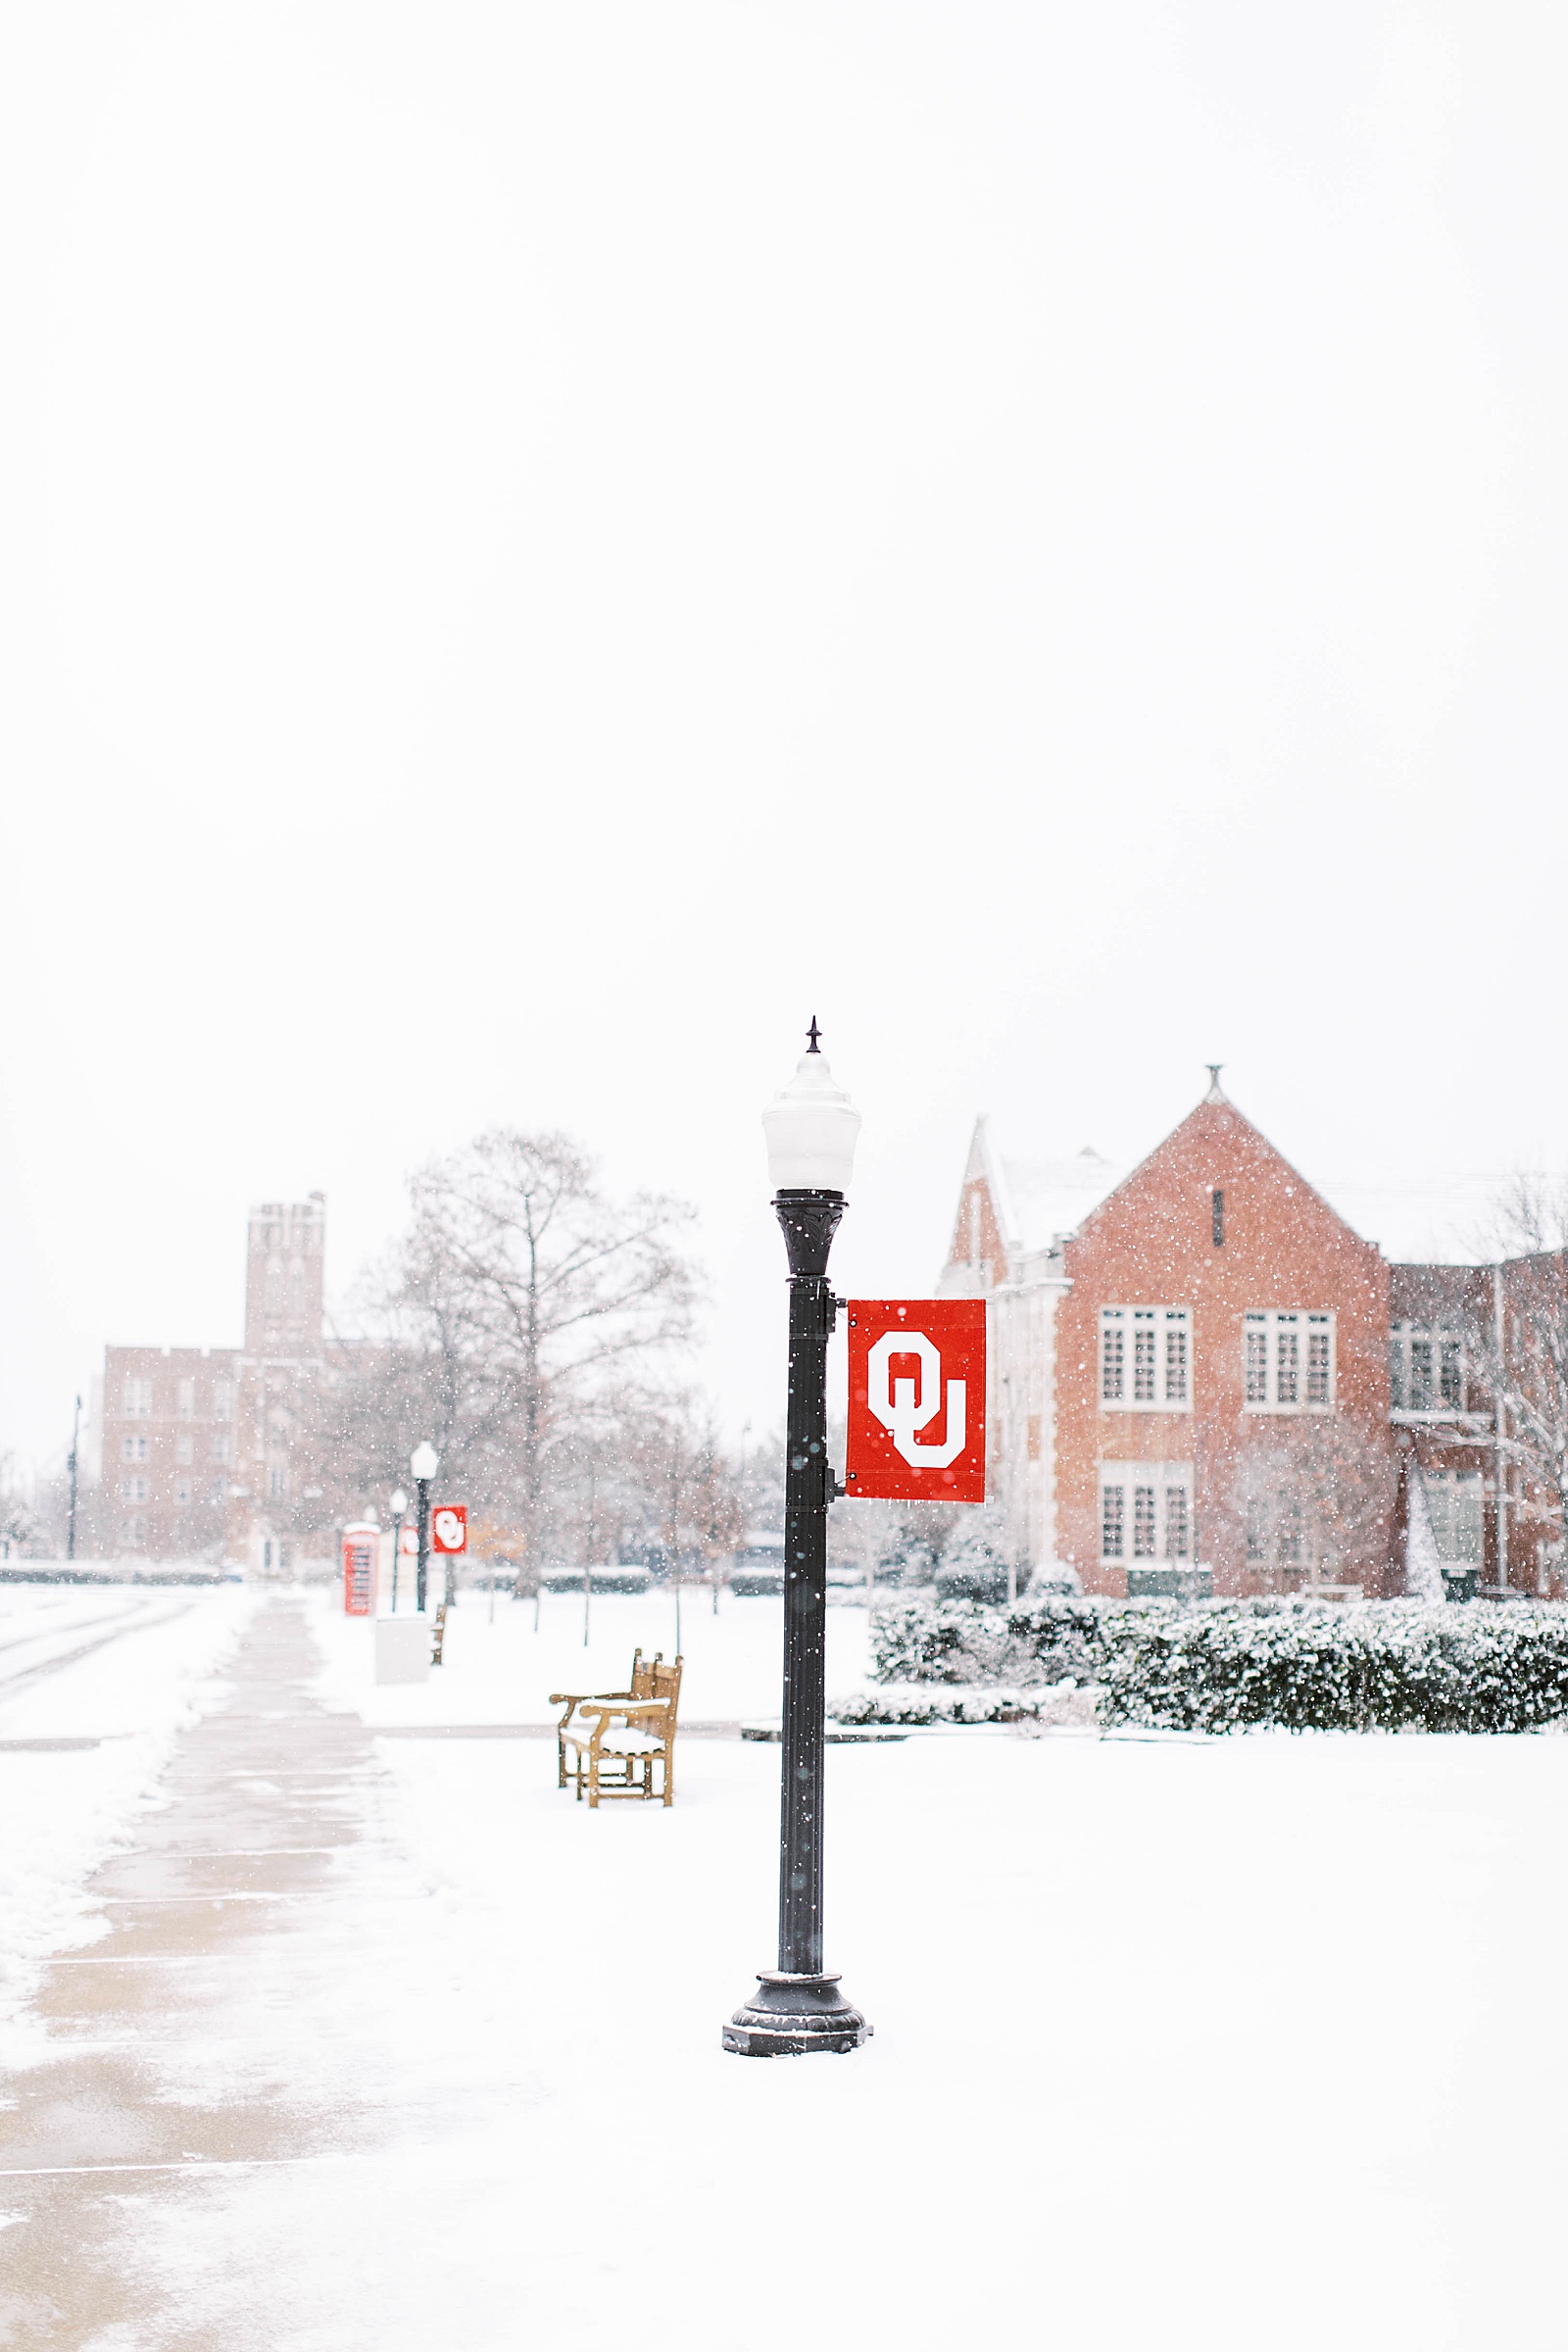 ou flag in the snow